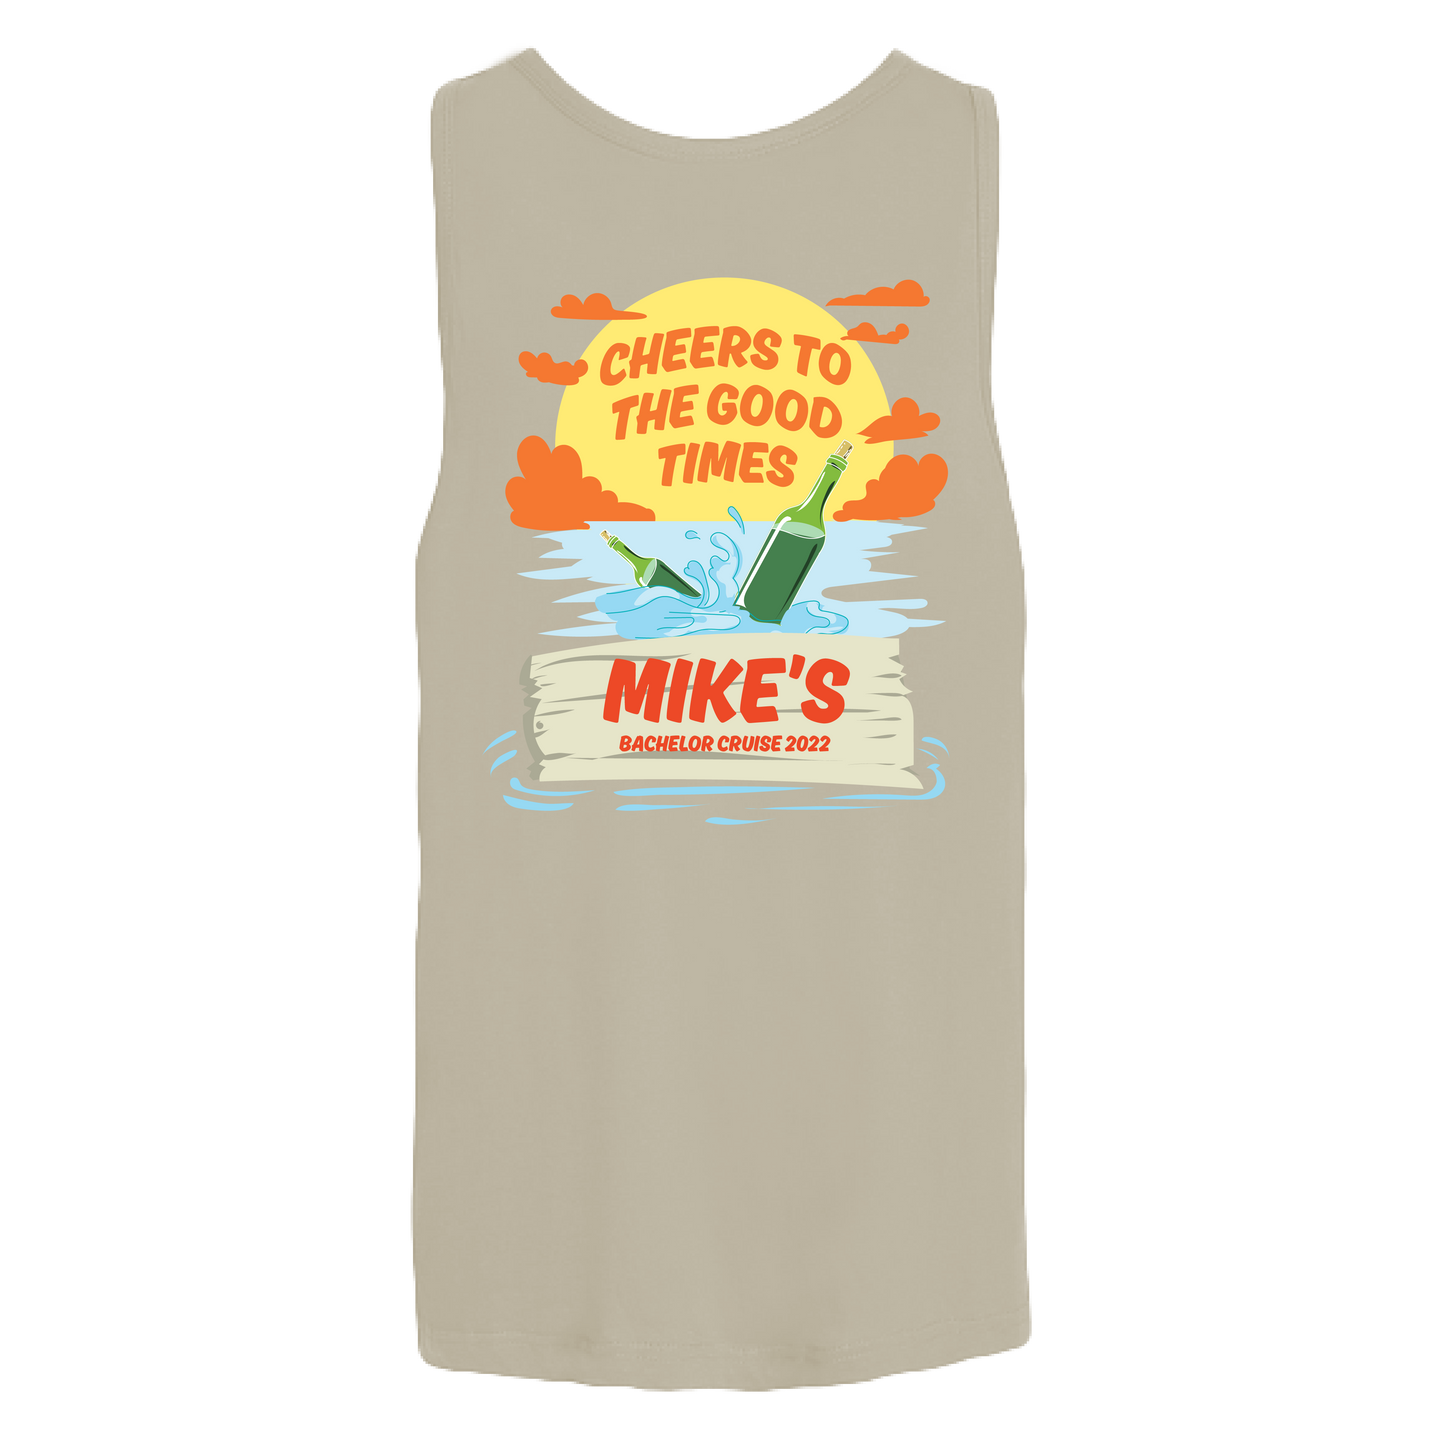 Good Times - Men's Personalized Tank Top